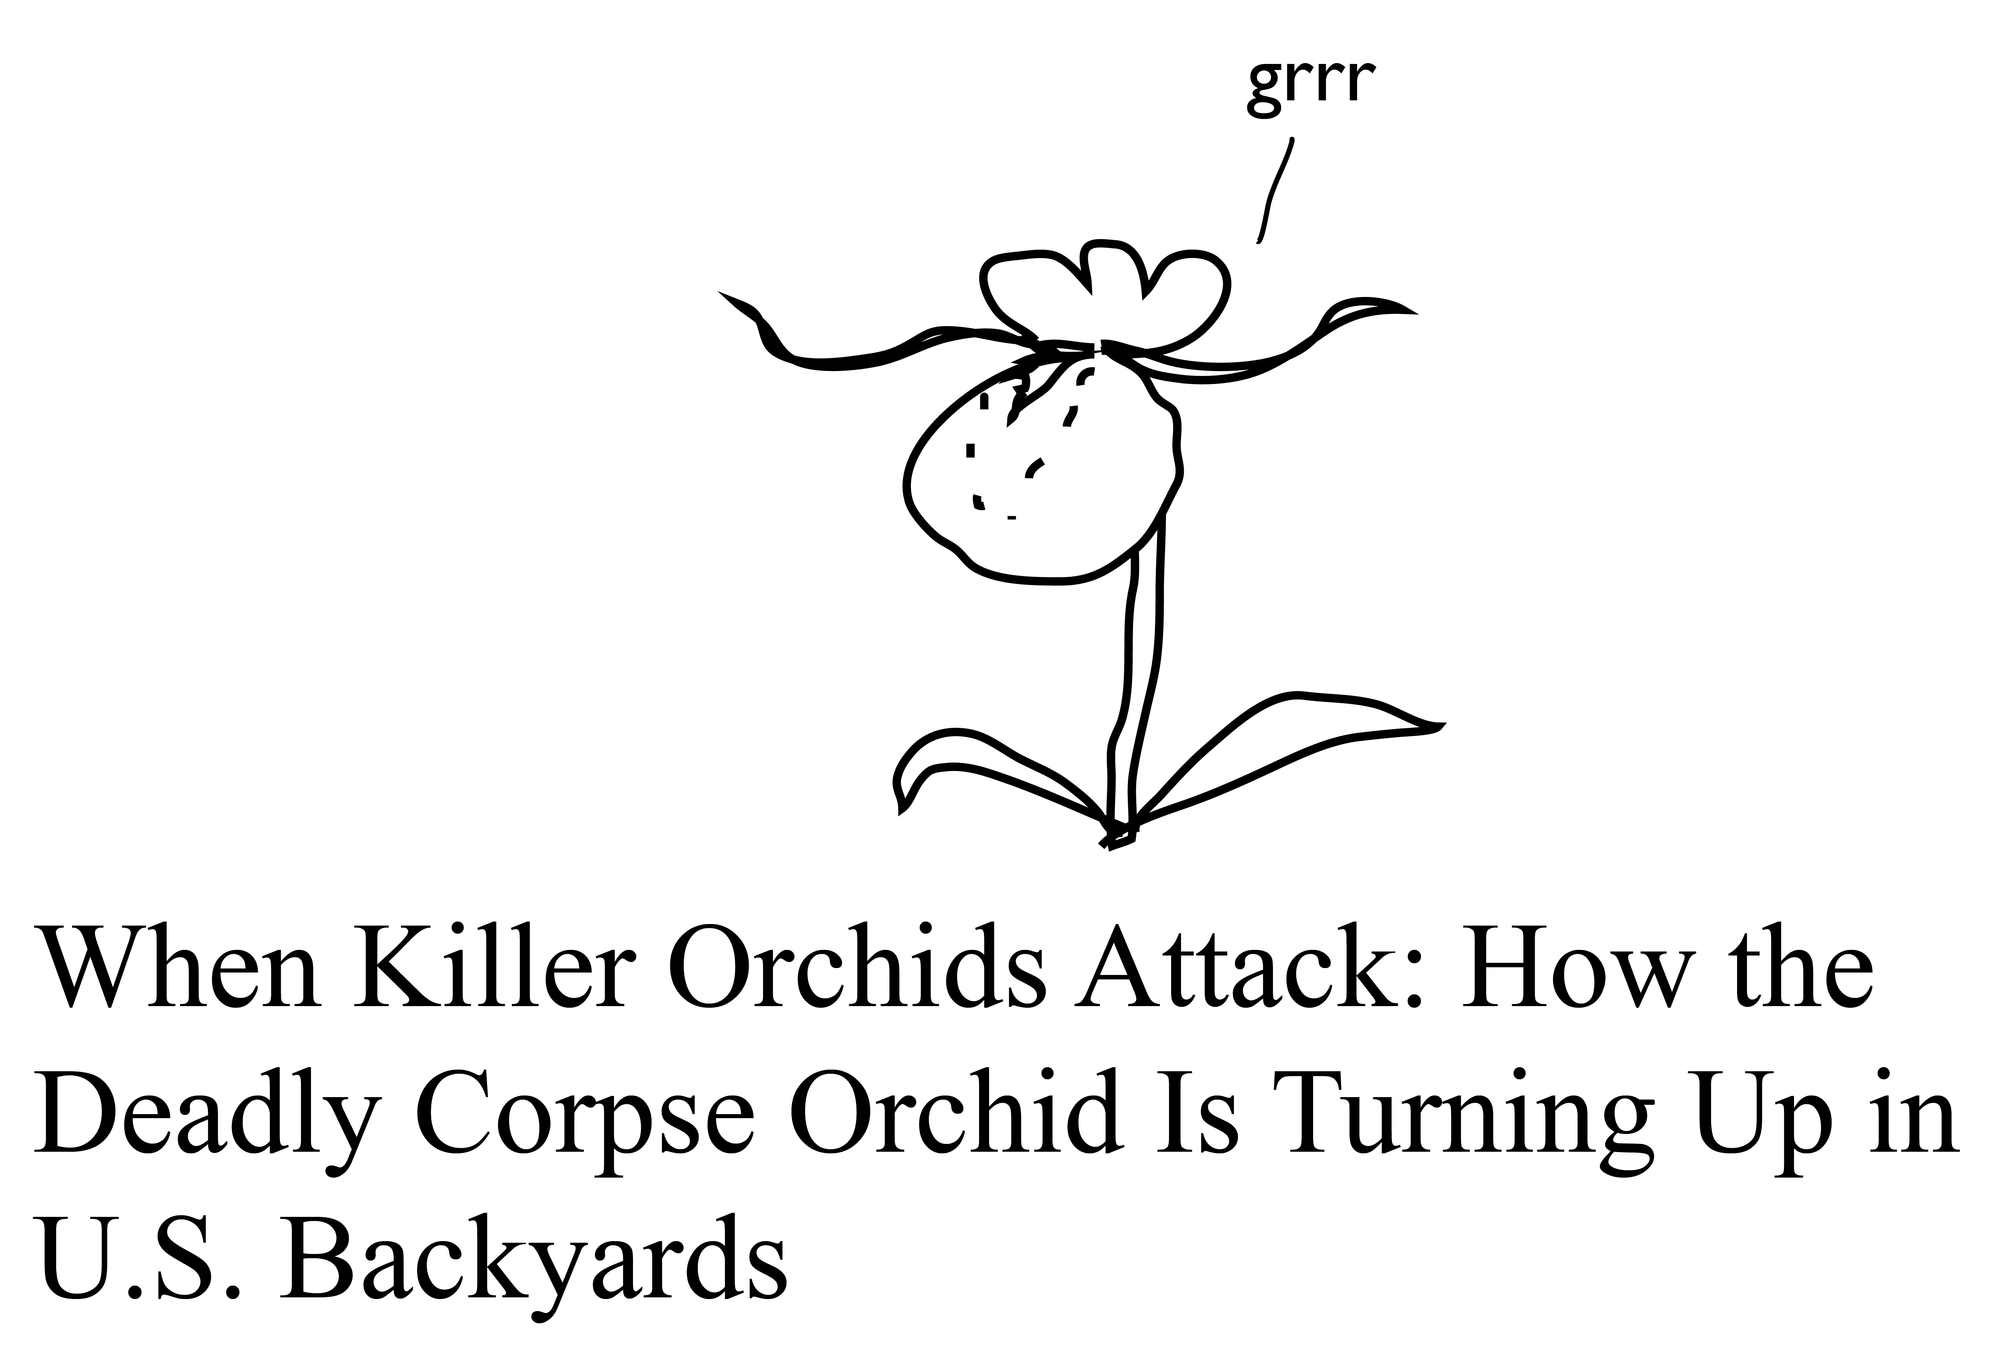 When Killer Orchids Attack: How the Deadly Corpse Orchid Is Turning Up in U.S. Backyards